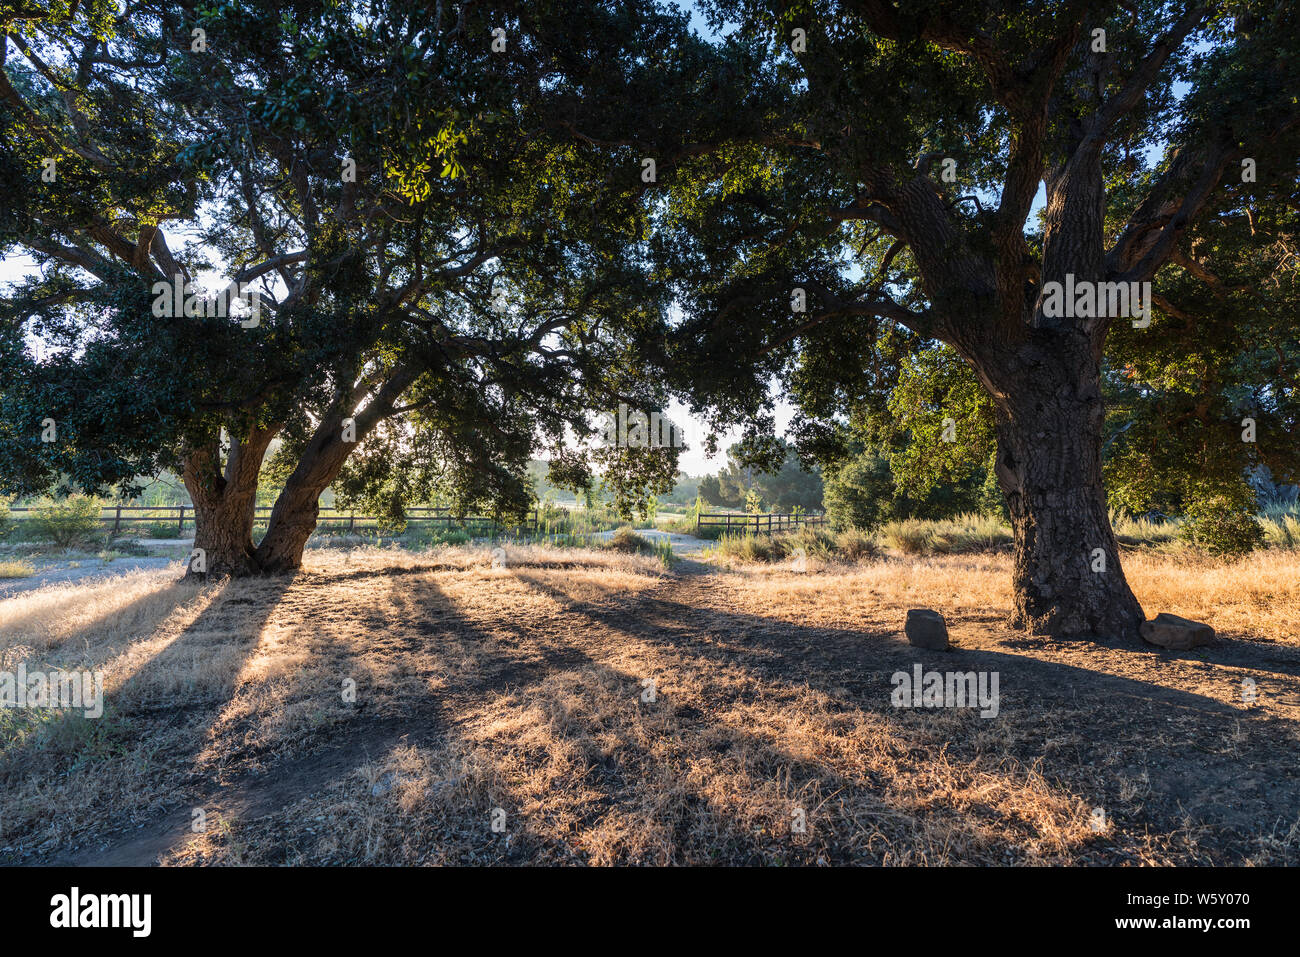 Old oak trees in early morning light at Chatsworth Park South in the San Fernando Valley area of Los Angeles, California. Stock Photo